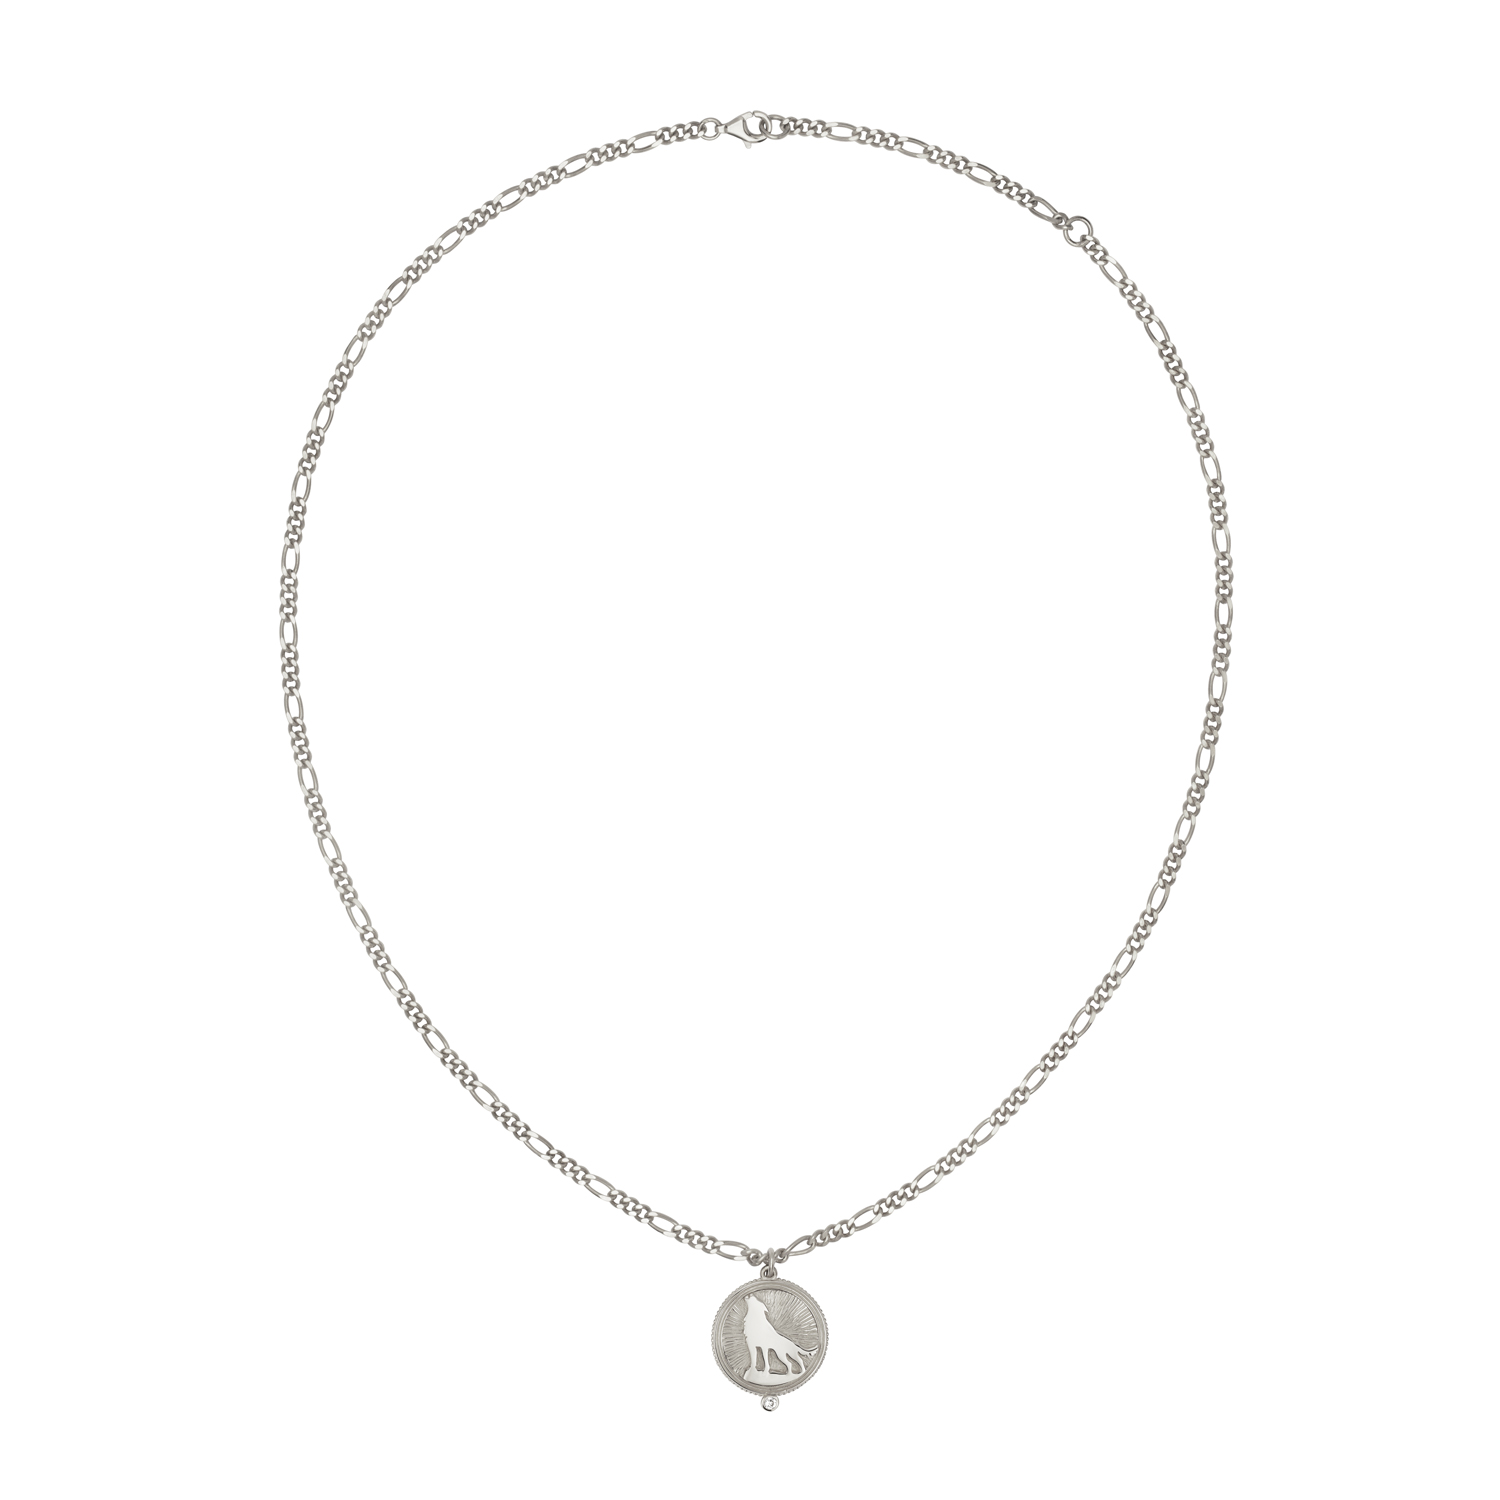 Wild Necklace Silver with White Zircon IV7332